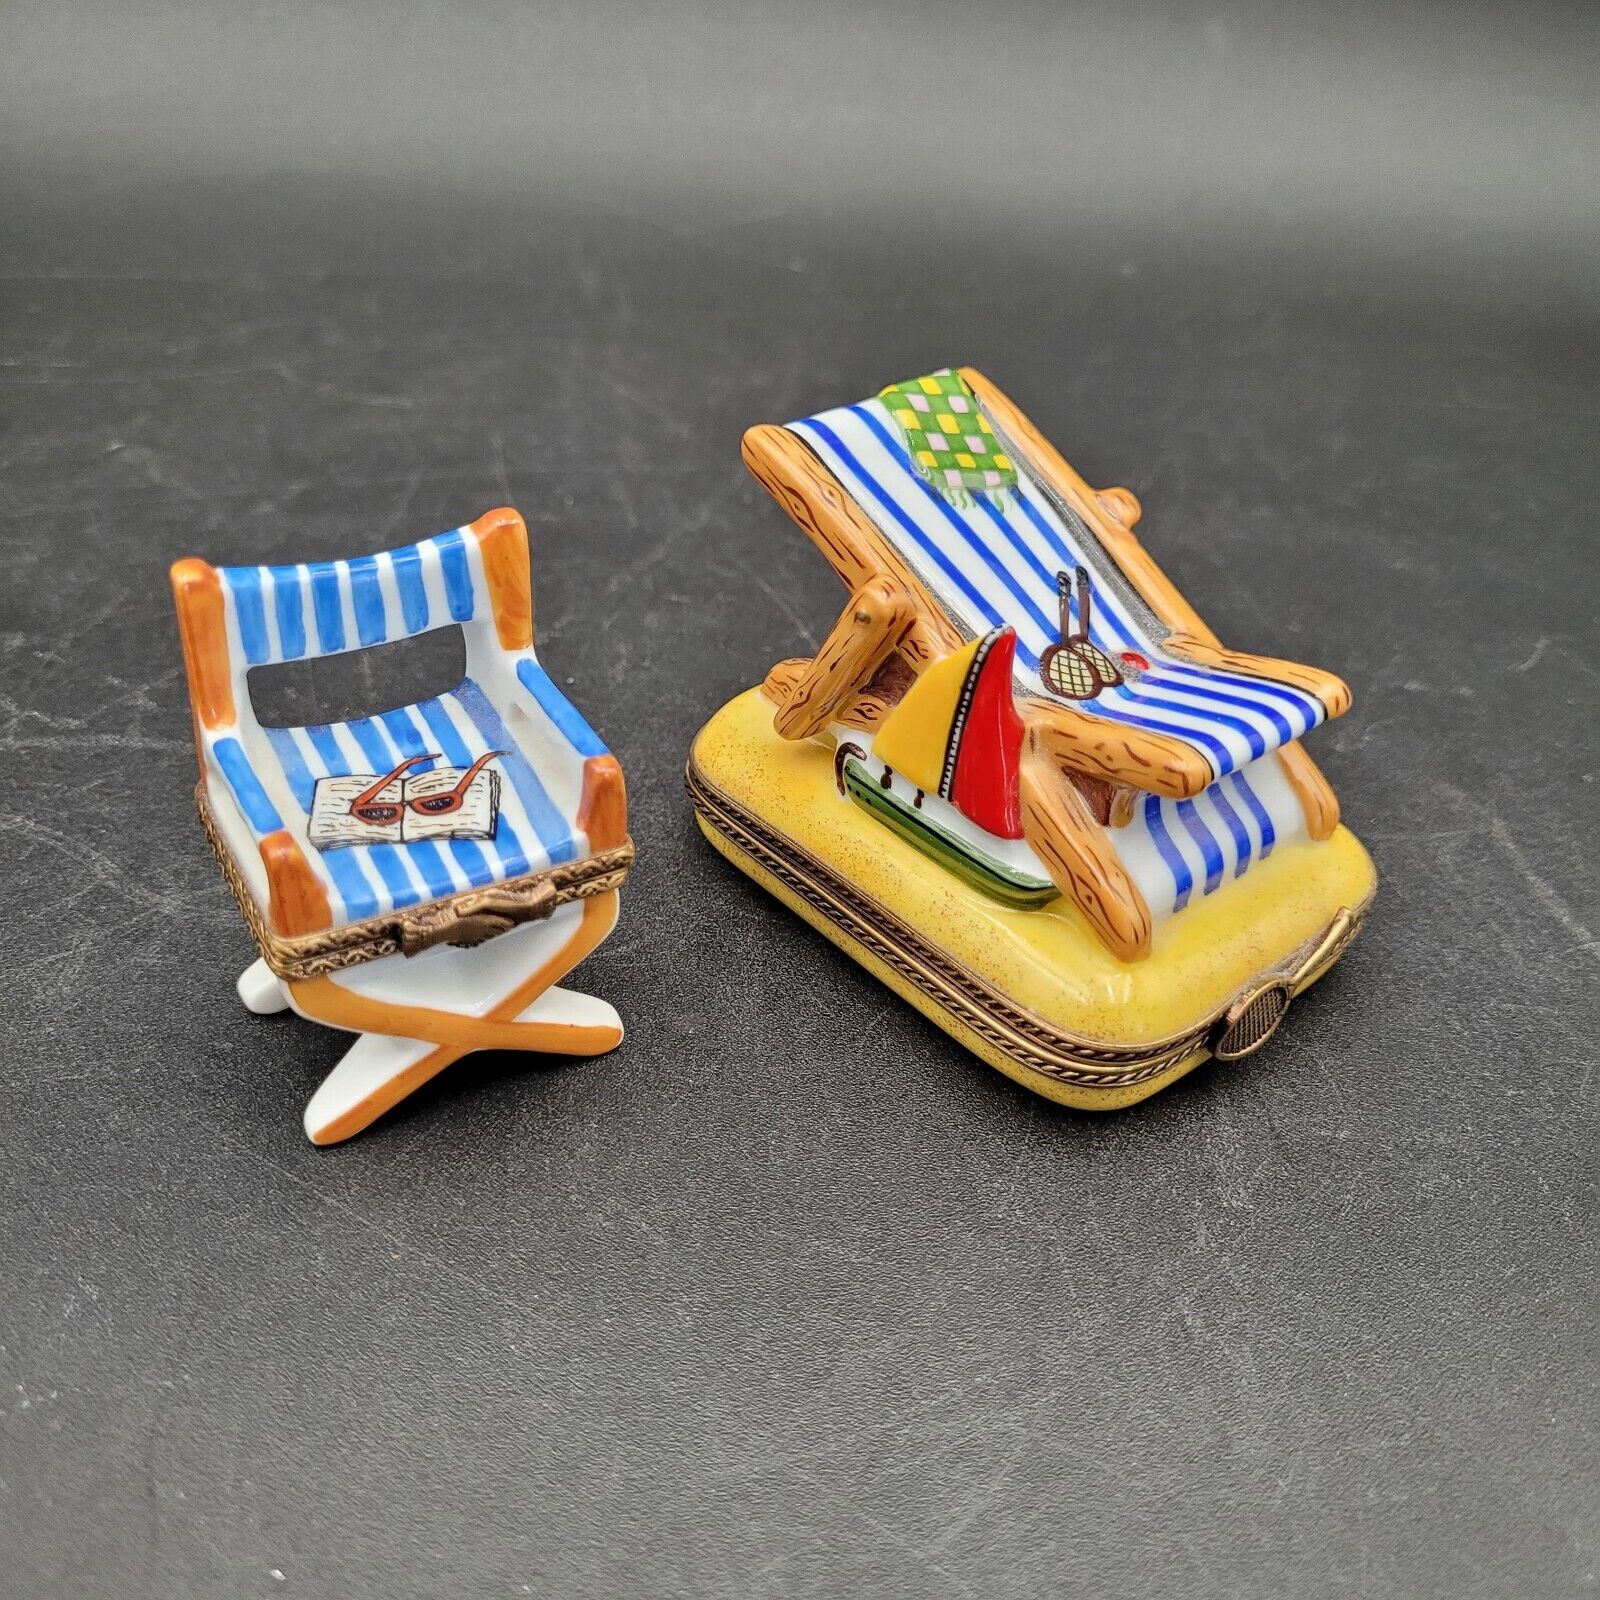 Two (2) Limoges Box Authentic Blue Strip Vacation Beach Chairs Sunglasses & Boat